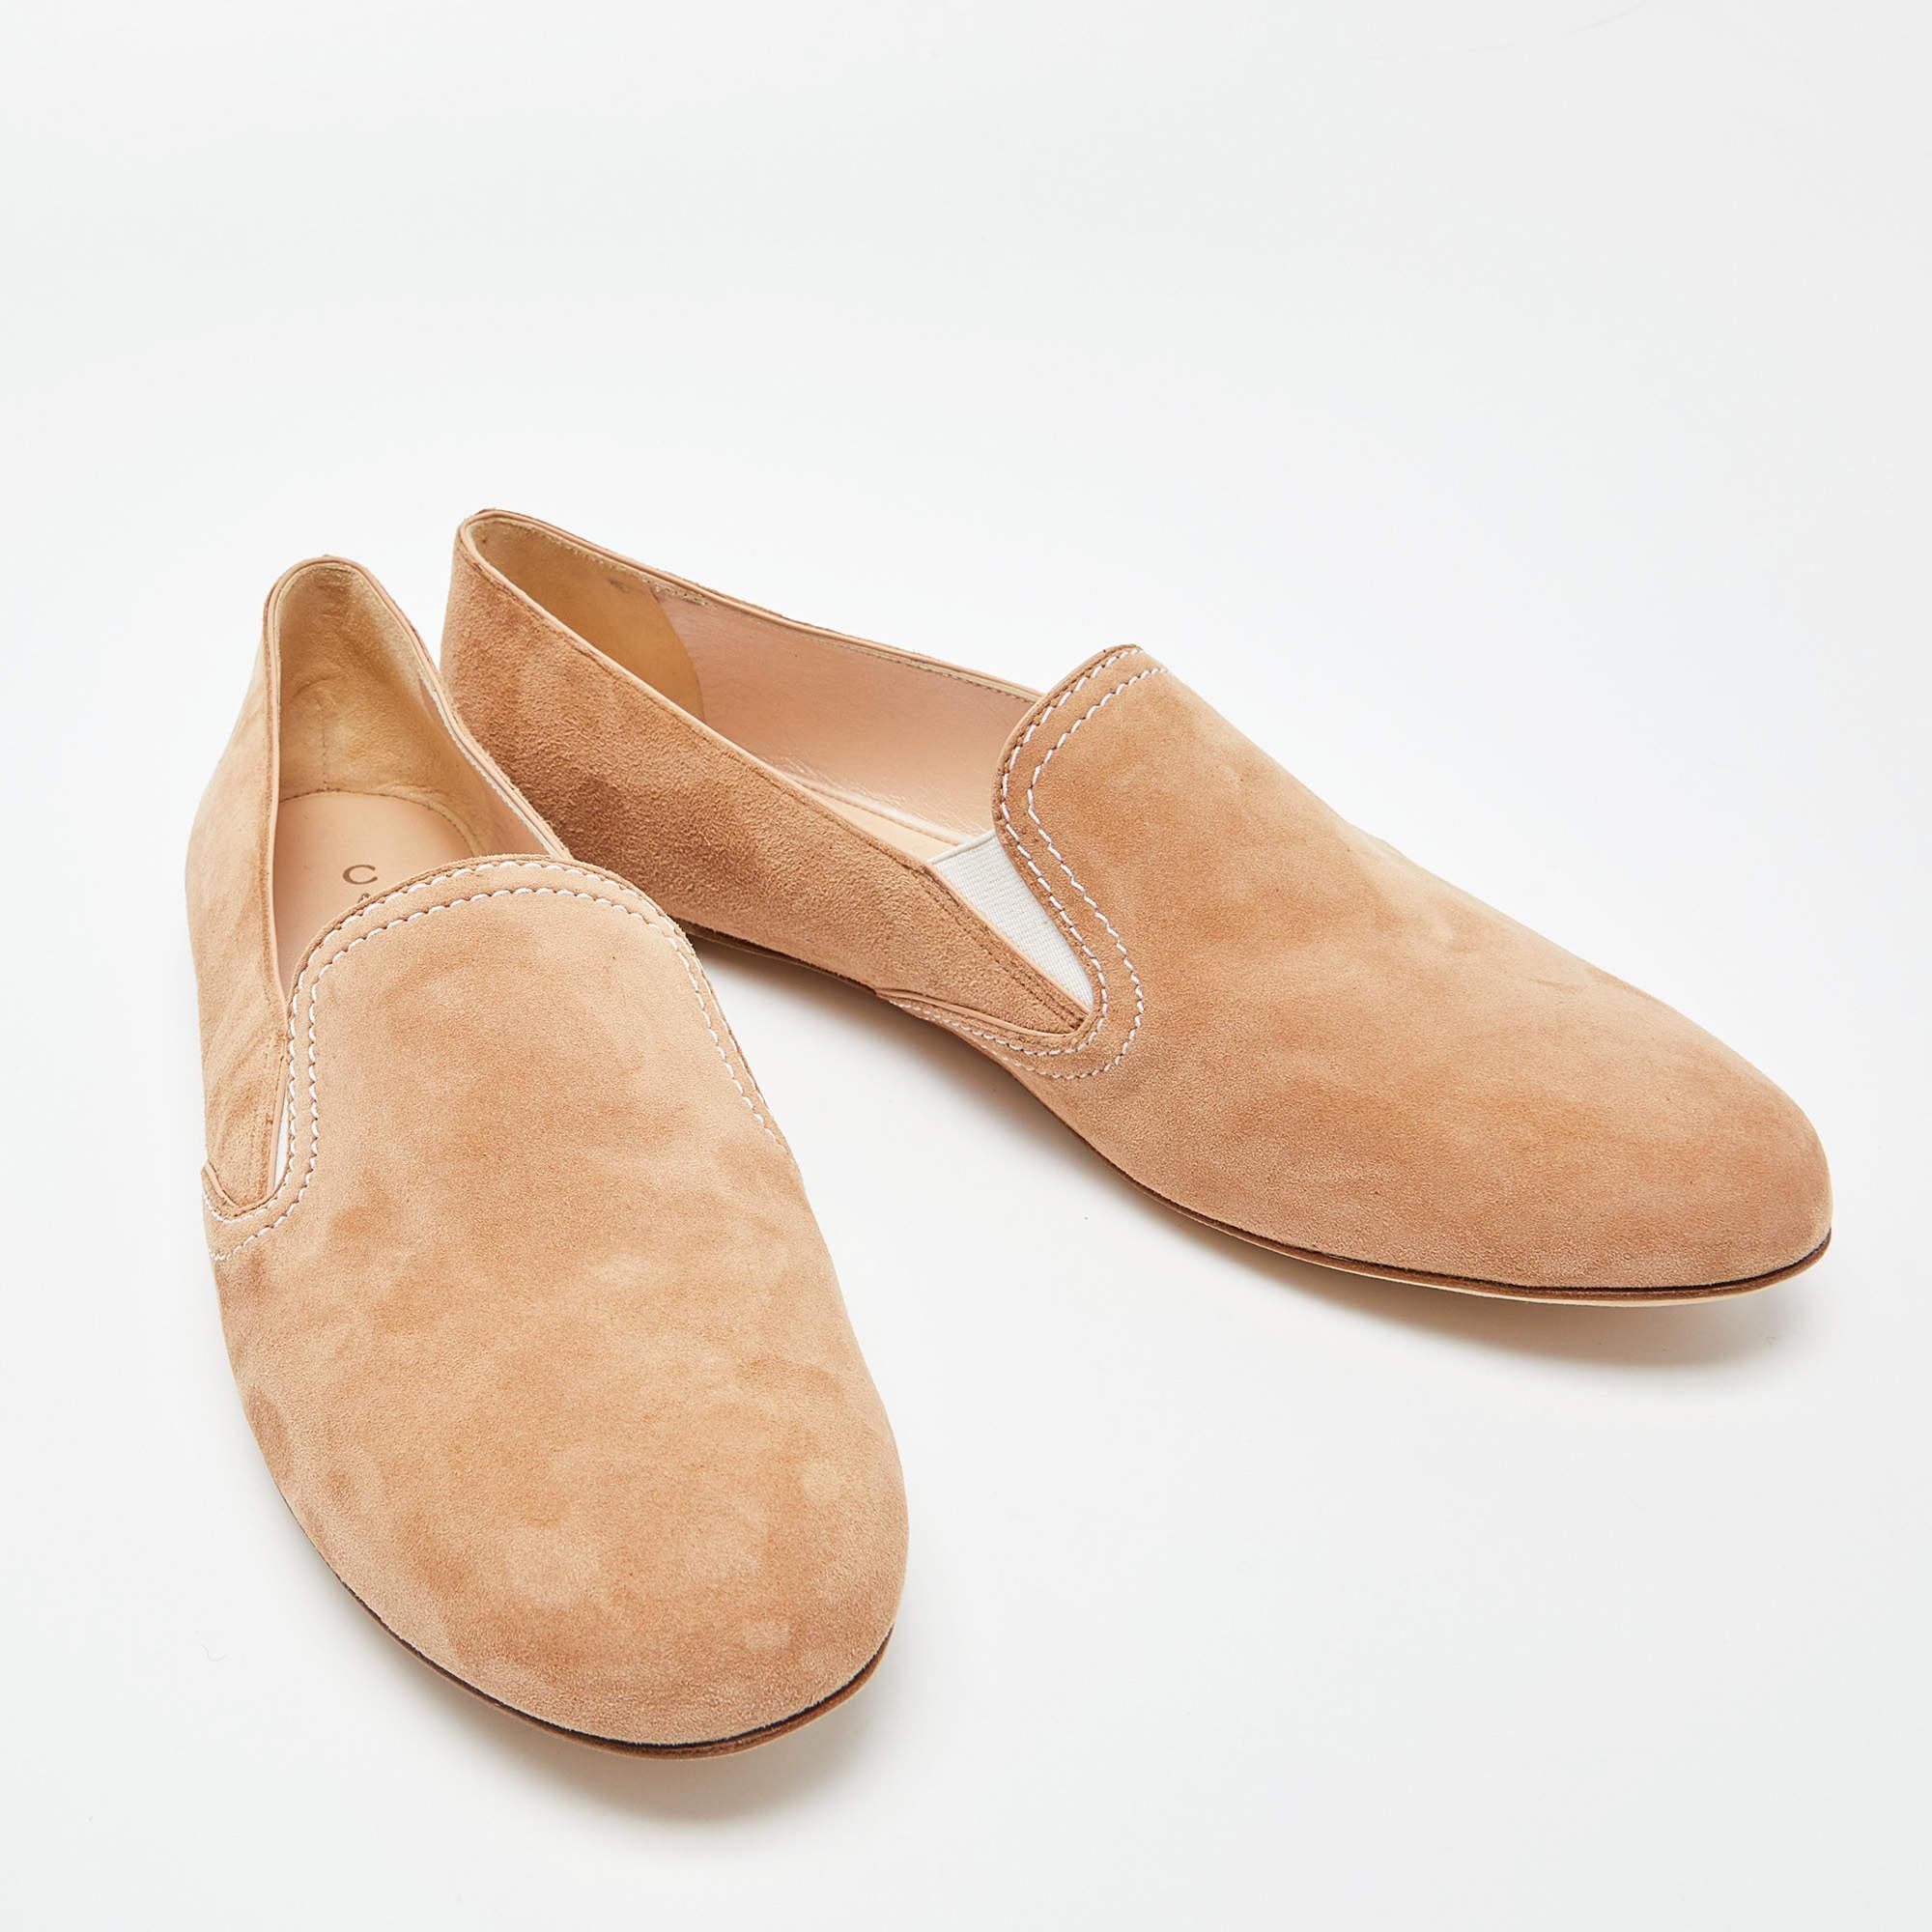 Casadei Beige Suede Smoking Slippers Size 40 For Sale 1